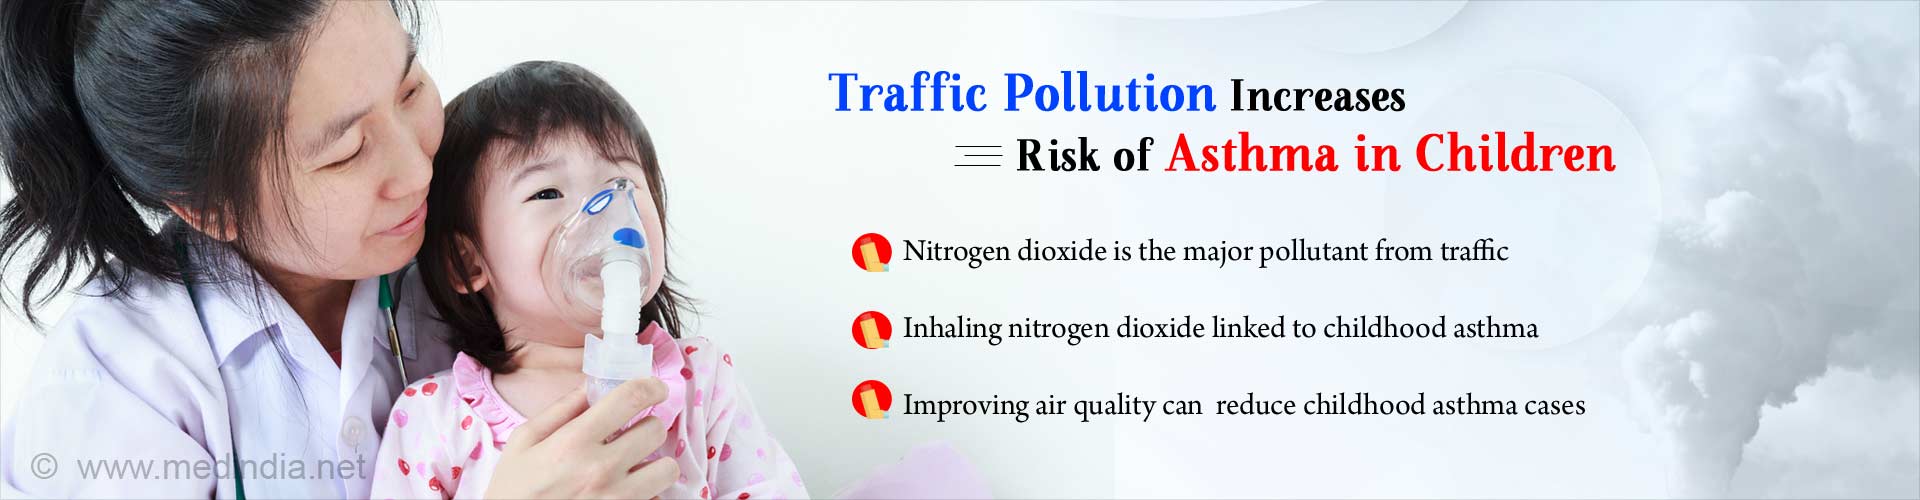 Traffic pollution increases risk of asthma in children. Nitrogen dioxide is the major pollutant from traffic. Inhaling nitrogen dioxide linked to childhood asthma. Improving air quality can reduce childhood asthma cases.